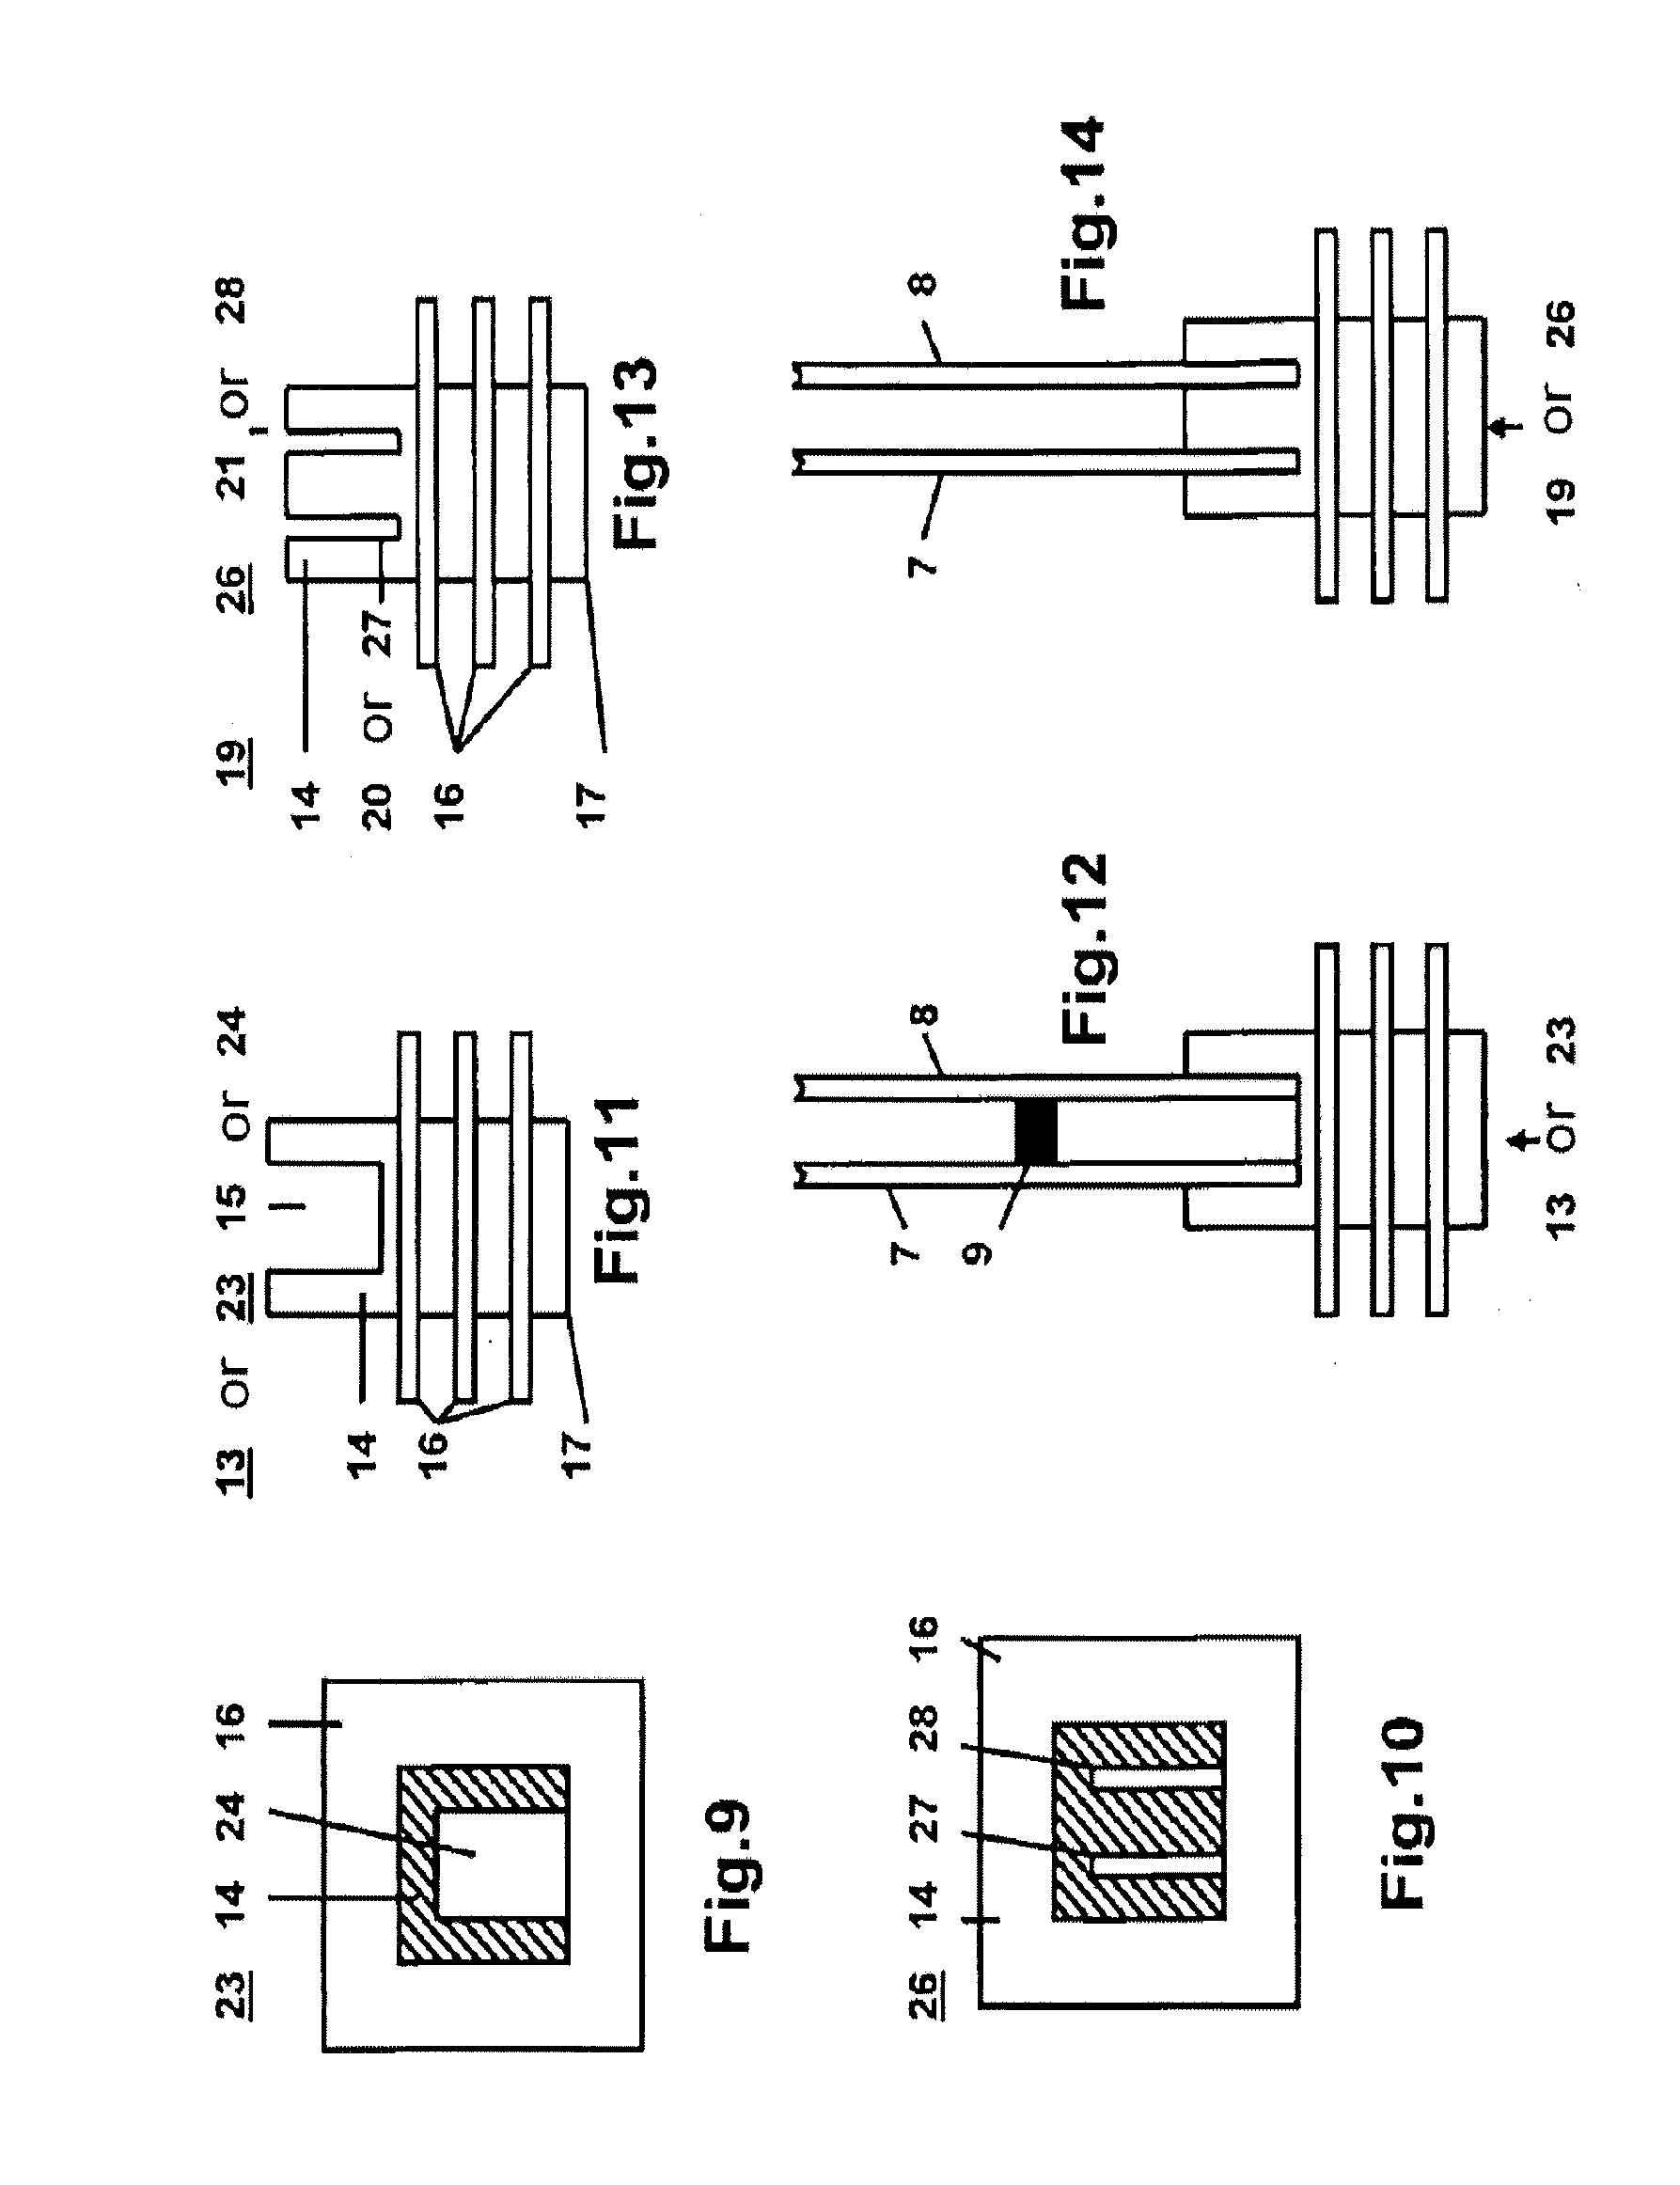 Single- or multi-phase dry-type transformer having at least two coils